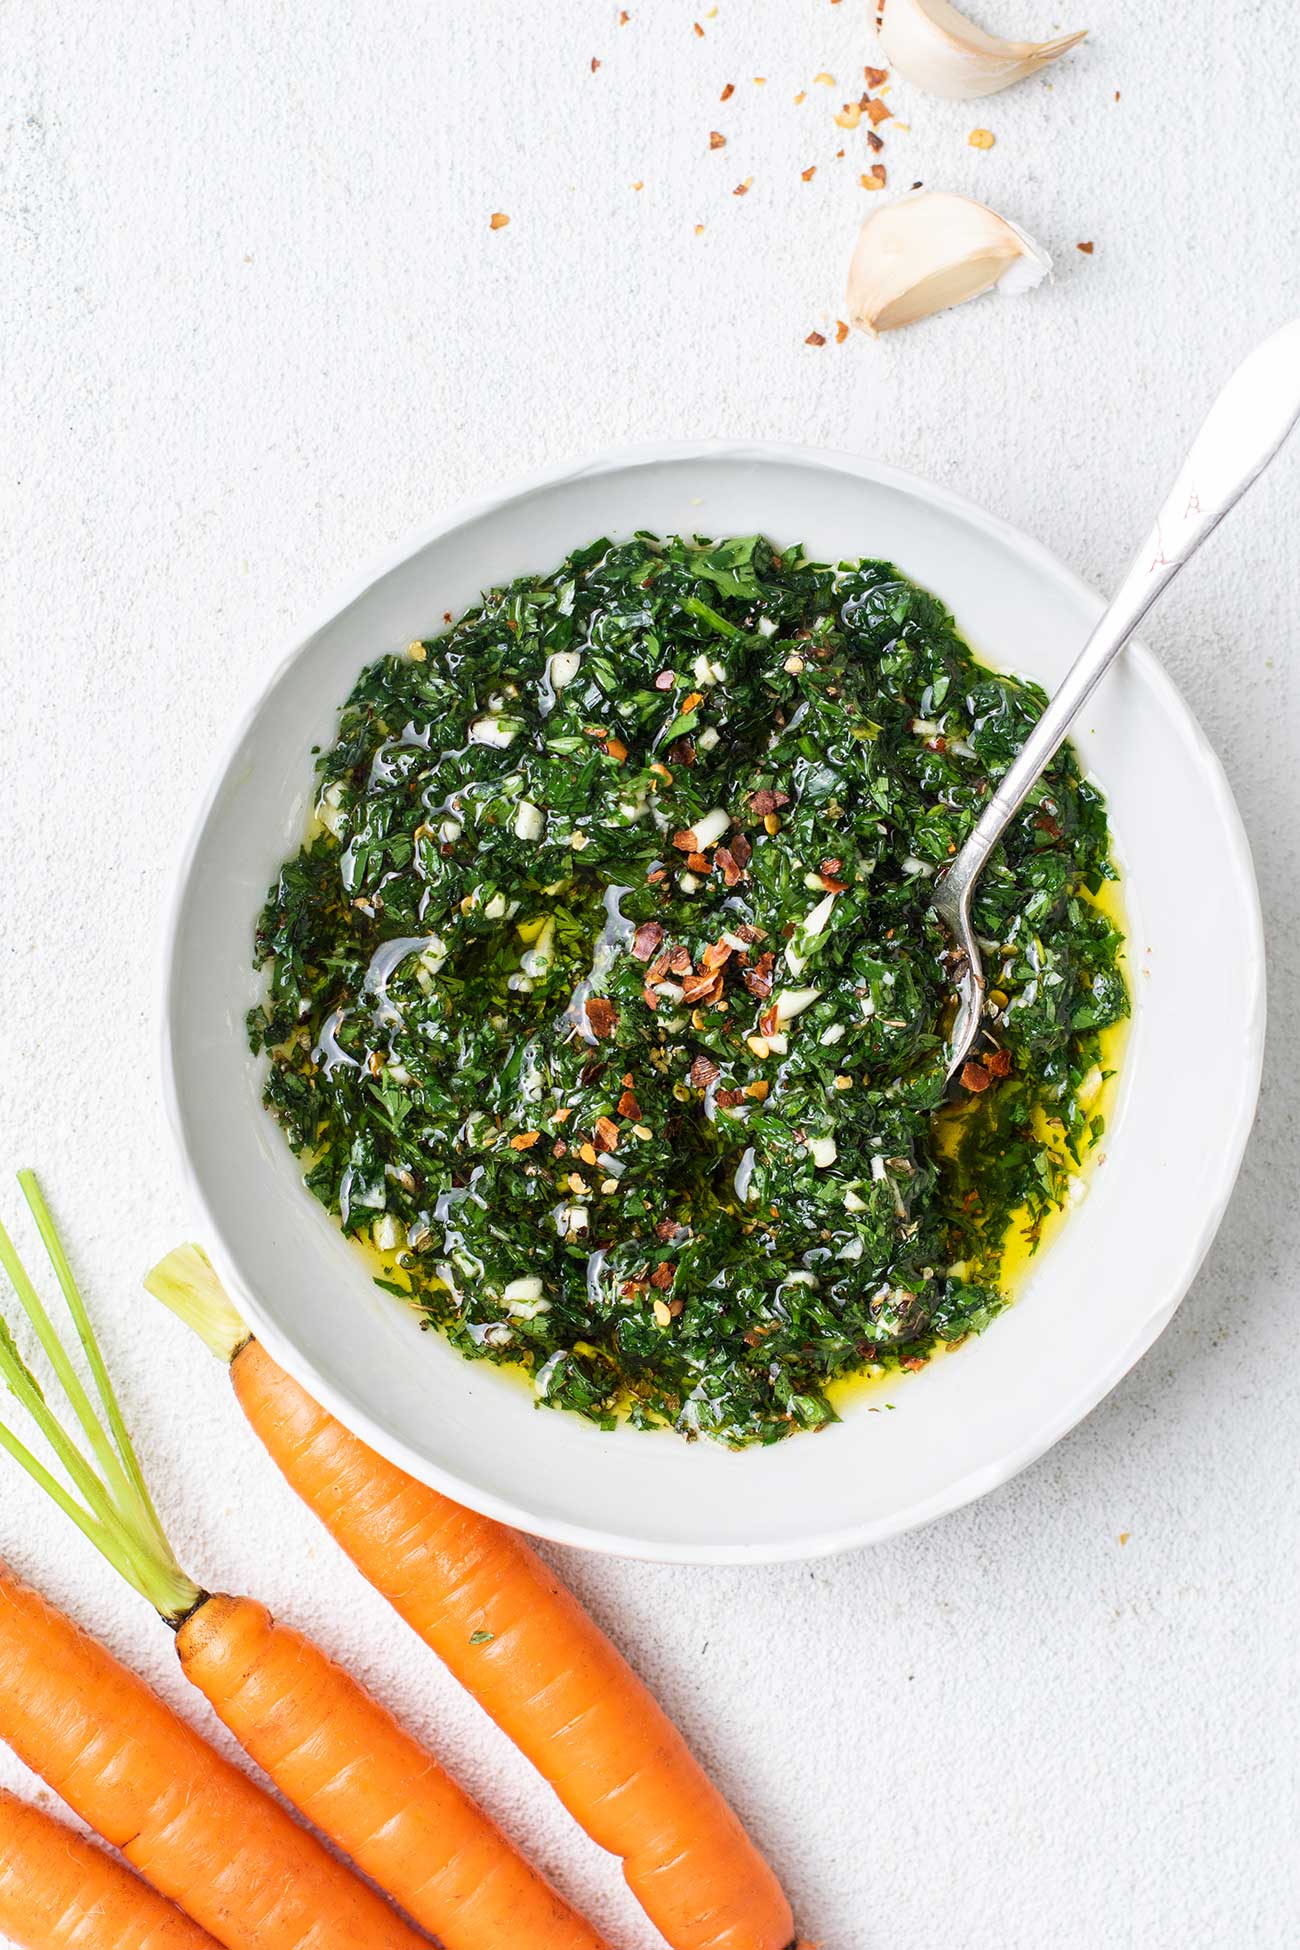 A bowl of carrot top chimichurri shown stirred together and garnished with red chili.